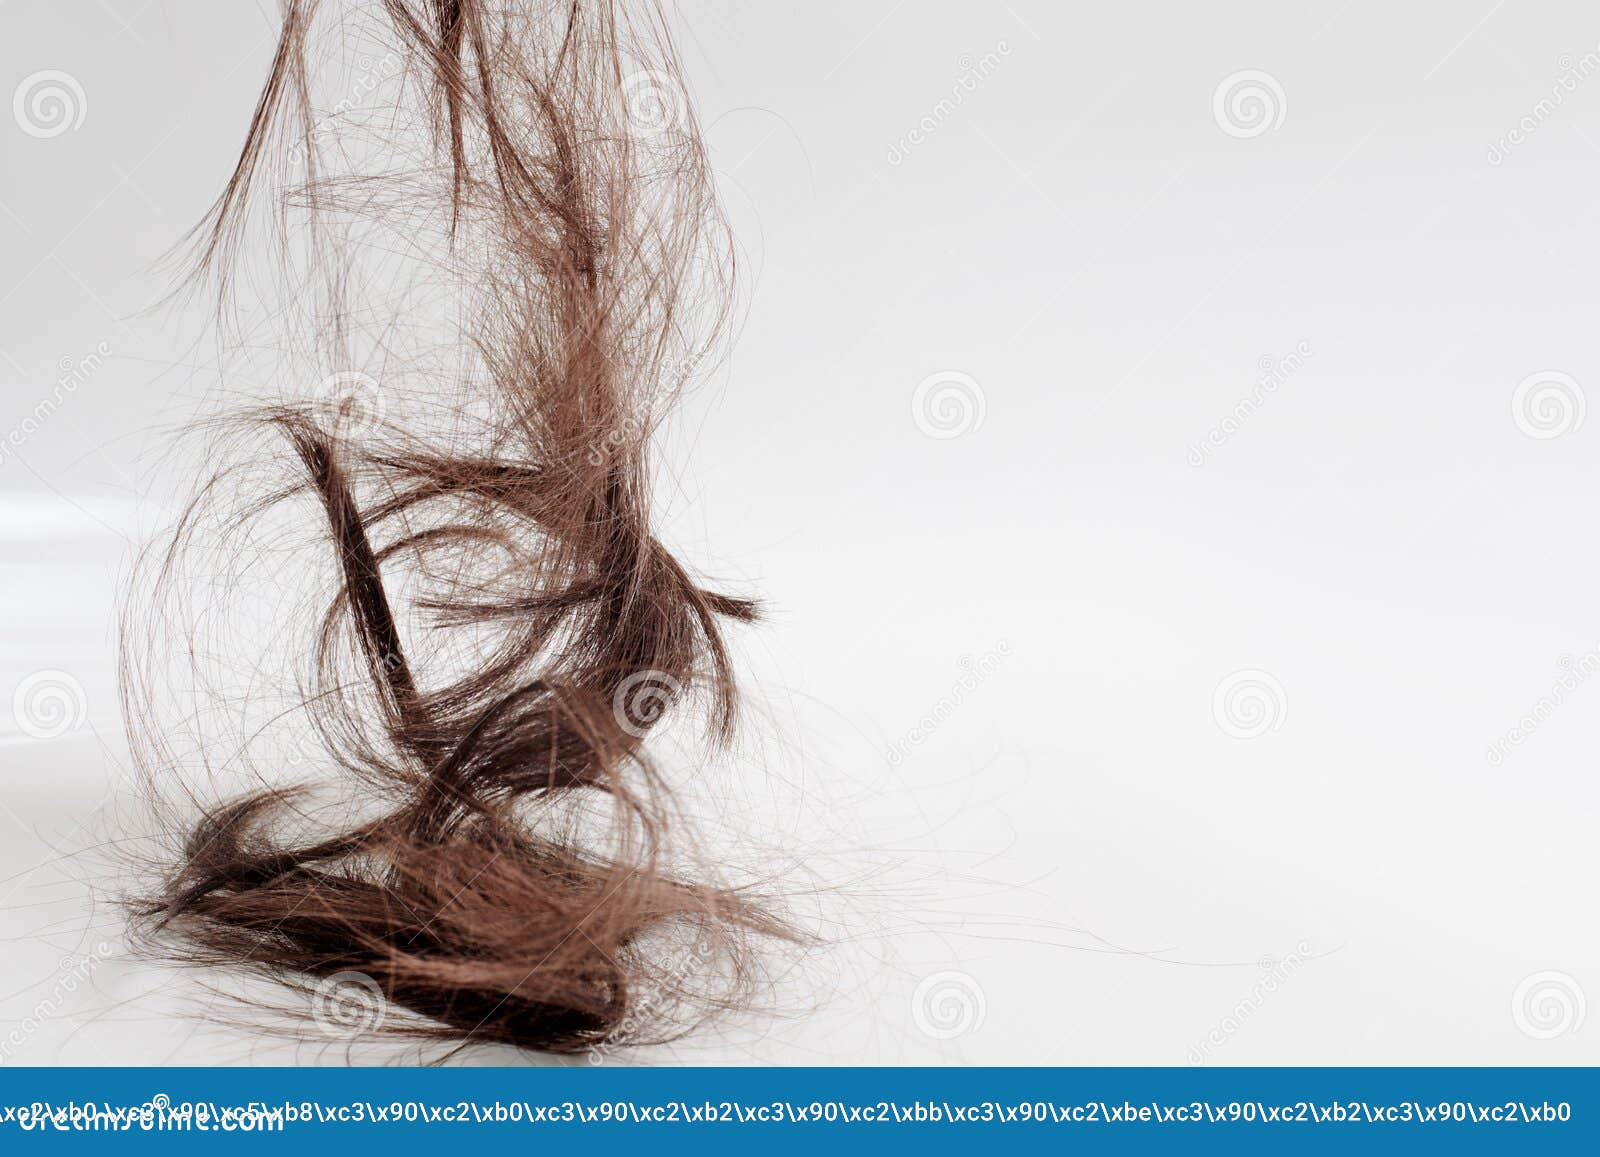 Hair Falls Down after Cutting. the Cut-off Brown Hair Falls from Above in a  Heap, Hanging in the Air Stock Photo - Image of care, hair: 184246546